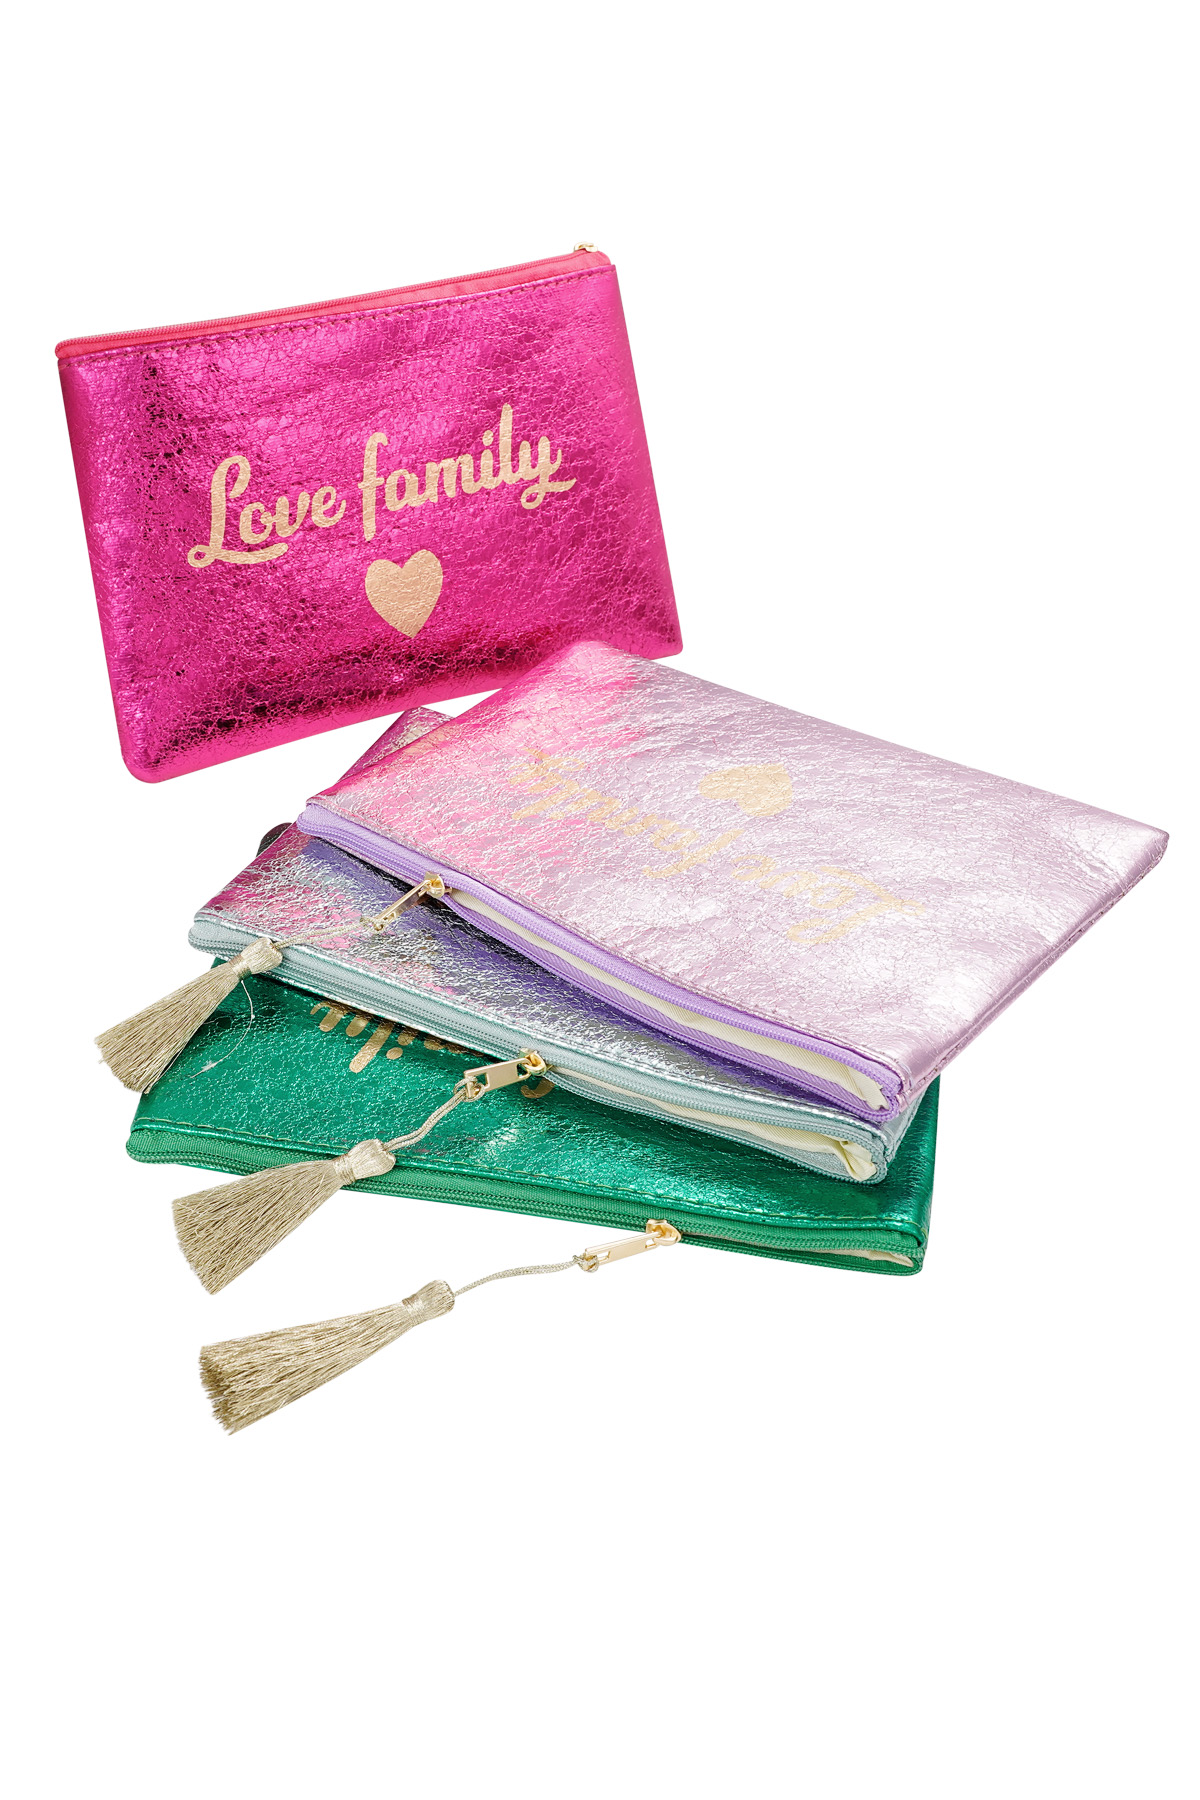 Make-up bag metallic love family - green Picture3